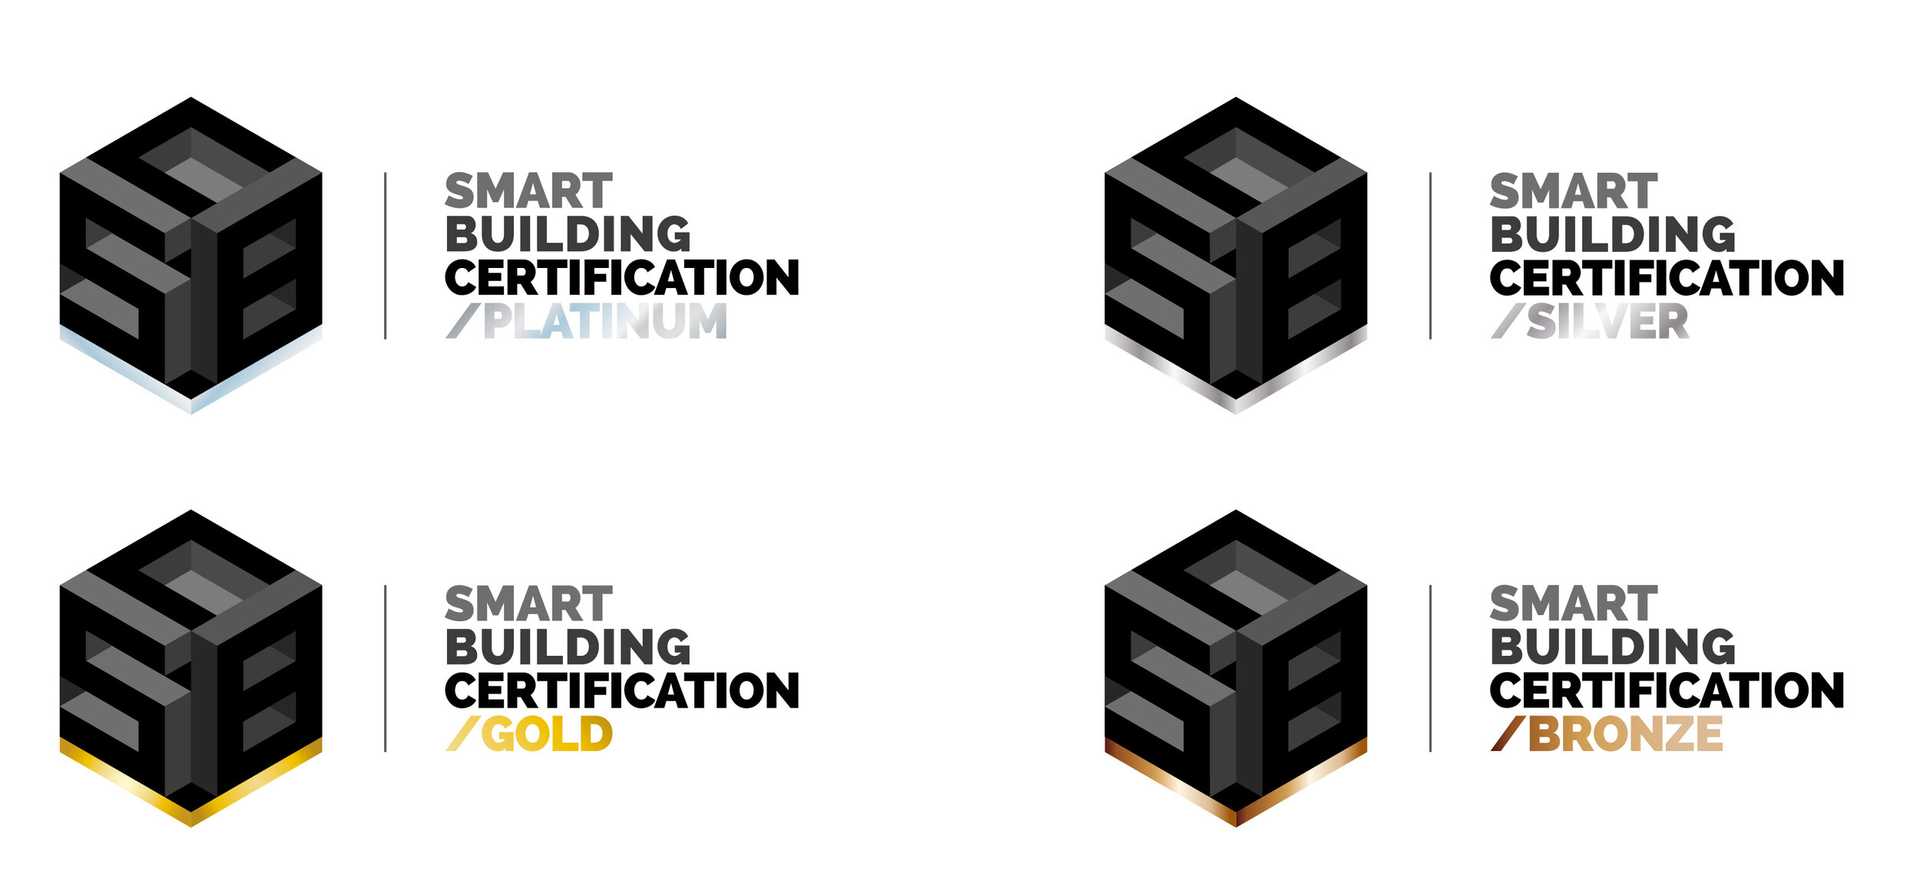 Logos for smart building certifications.